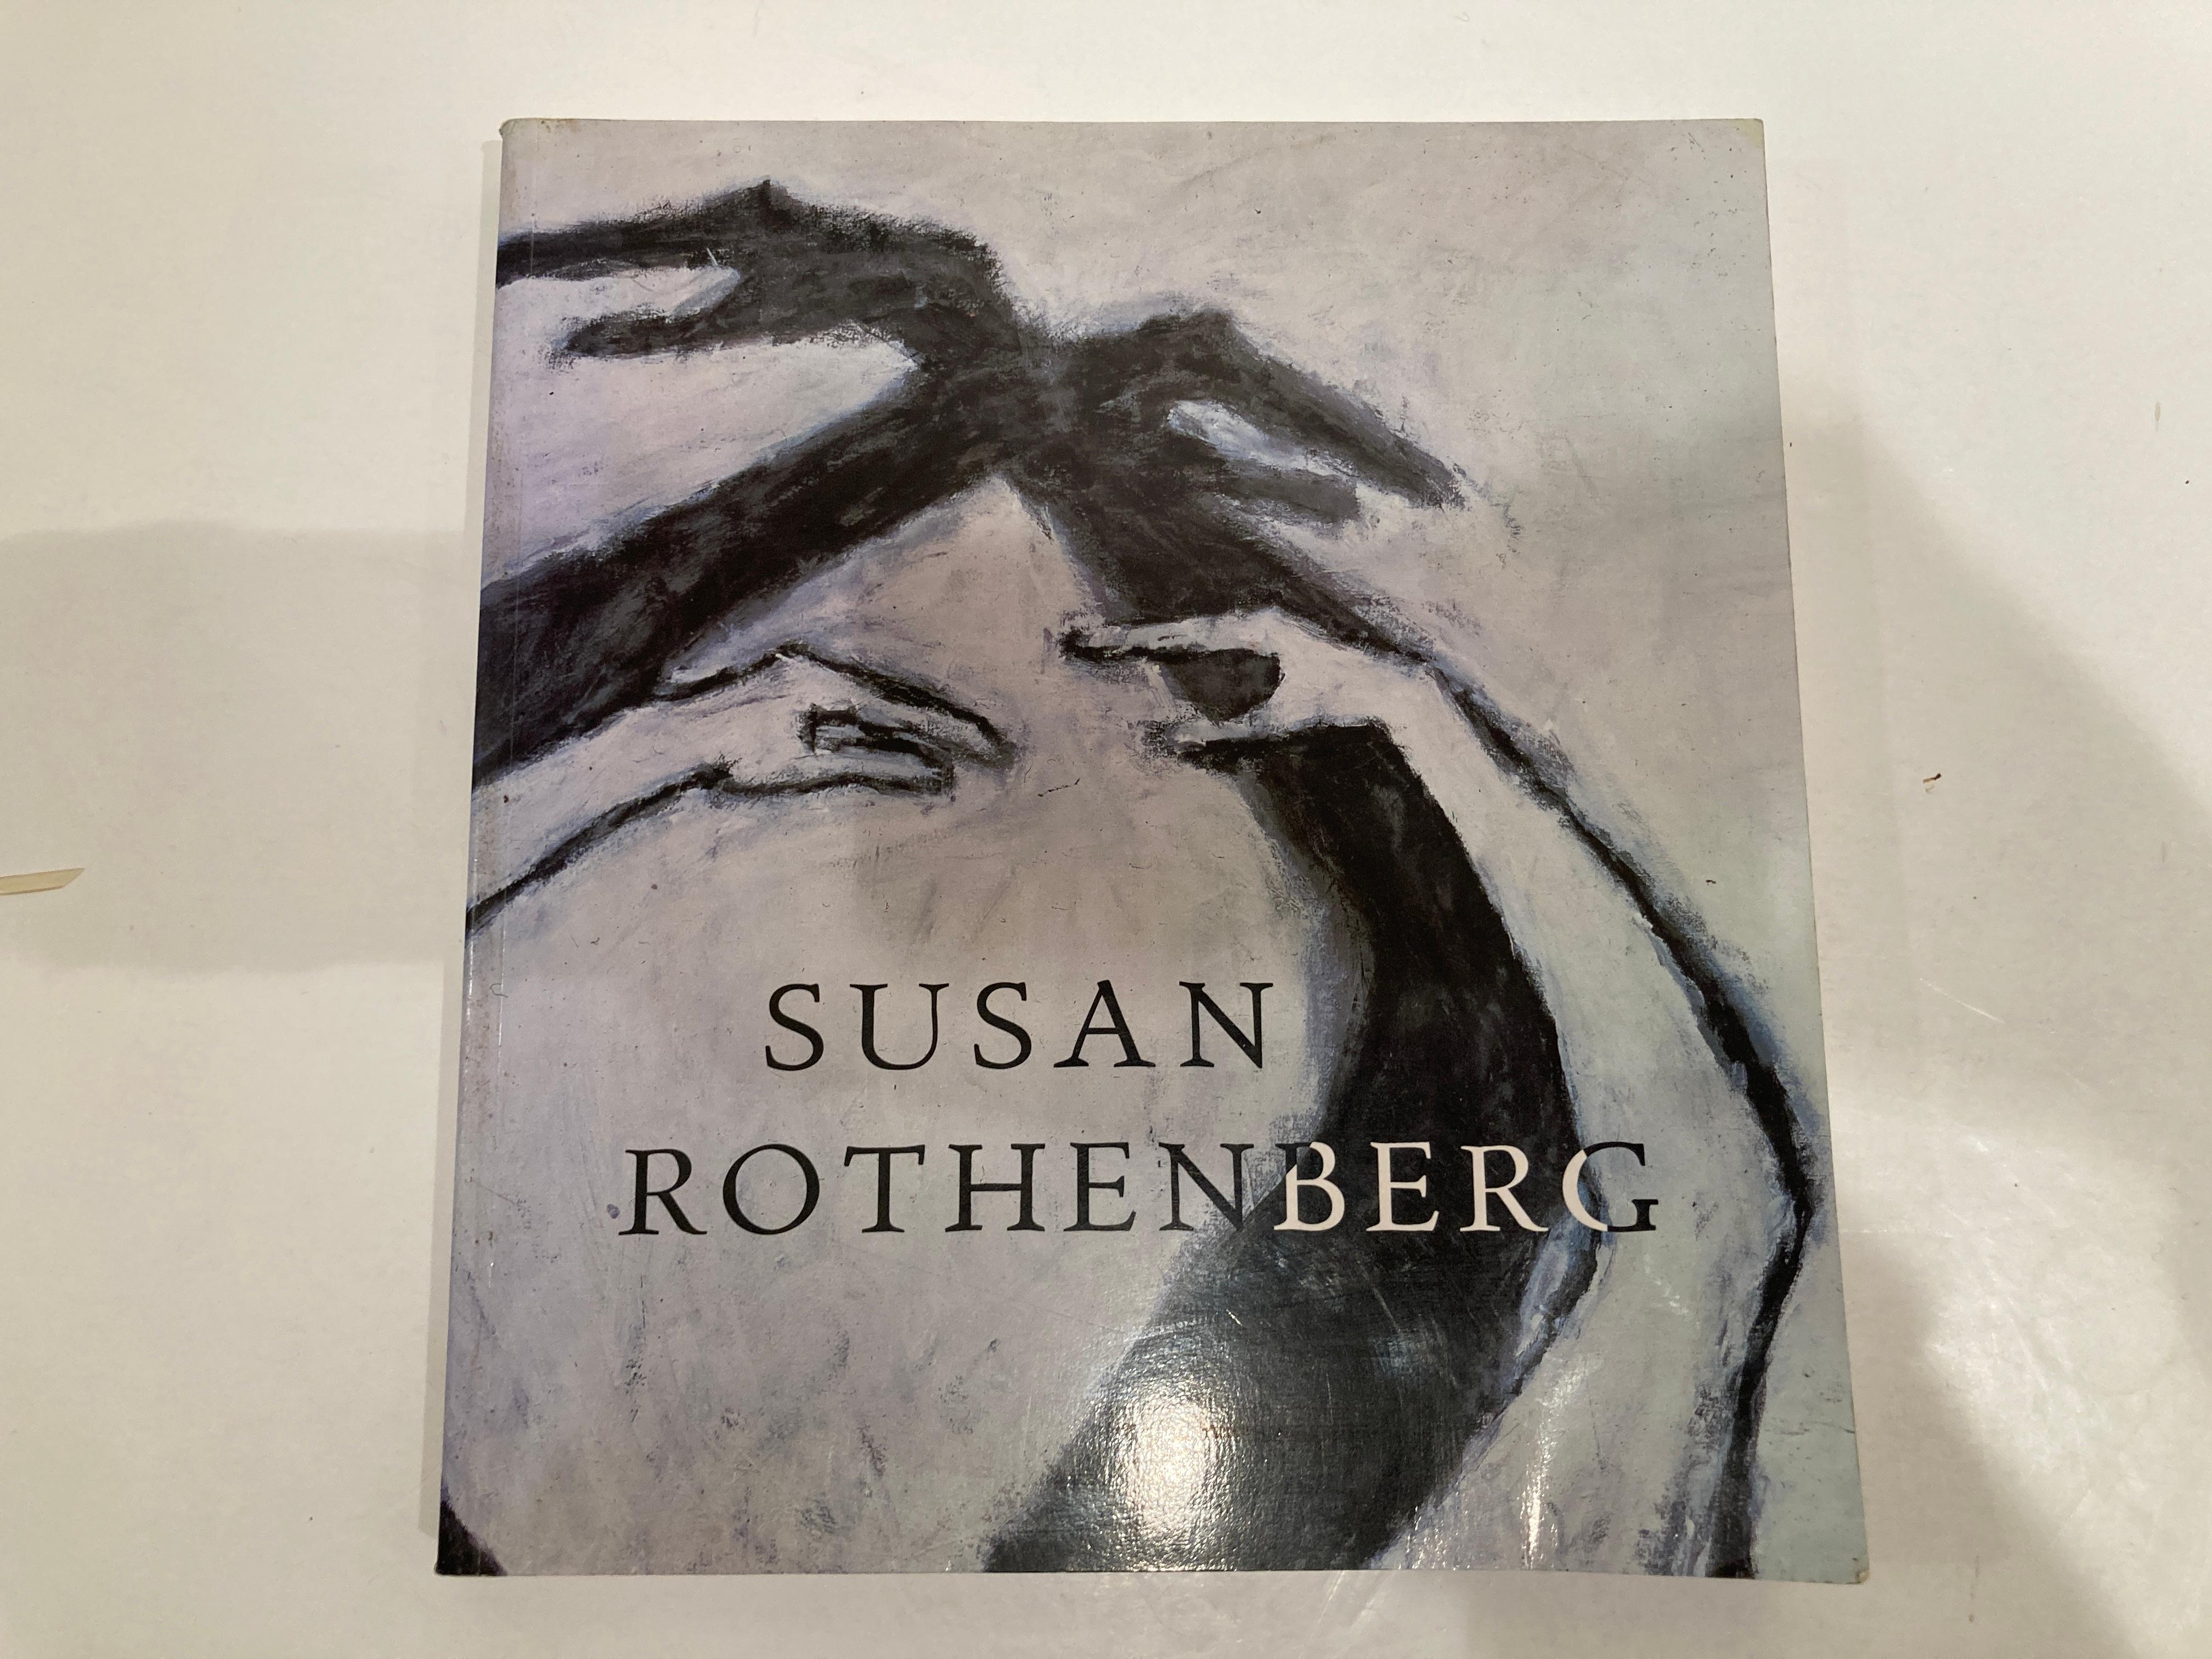 Susan Rothenberg collectible contemporary art book by Joan Simon
Synopsis:
Susan Rothenberg is recognized as an innovative painter and was a key figure in the revitalization of painting in the 1970s. This book represents a monograph of her life